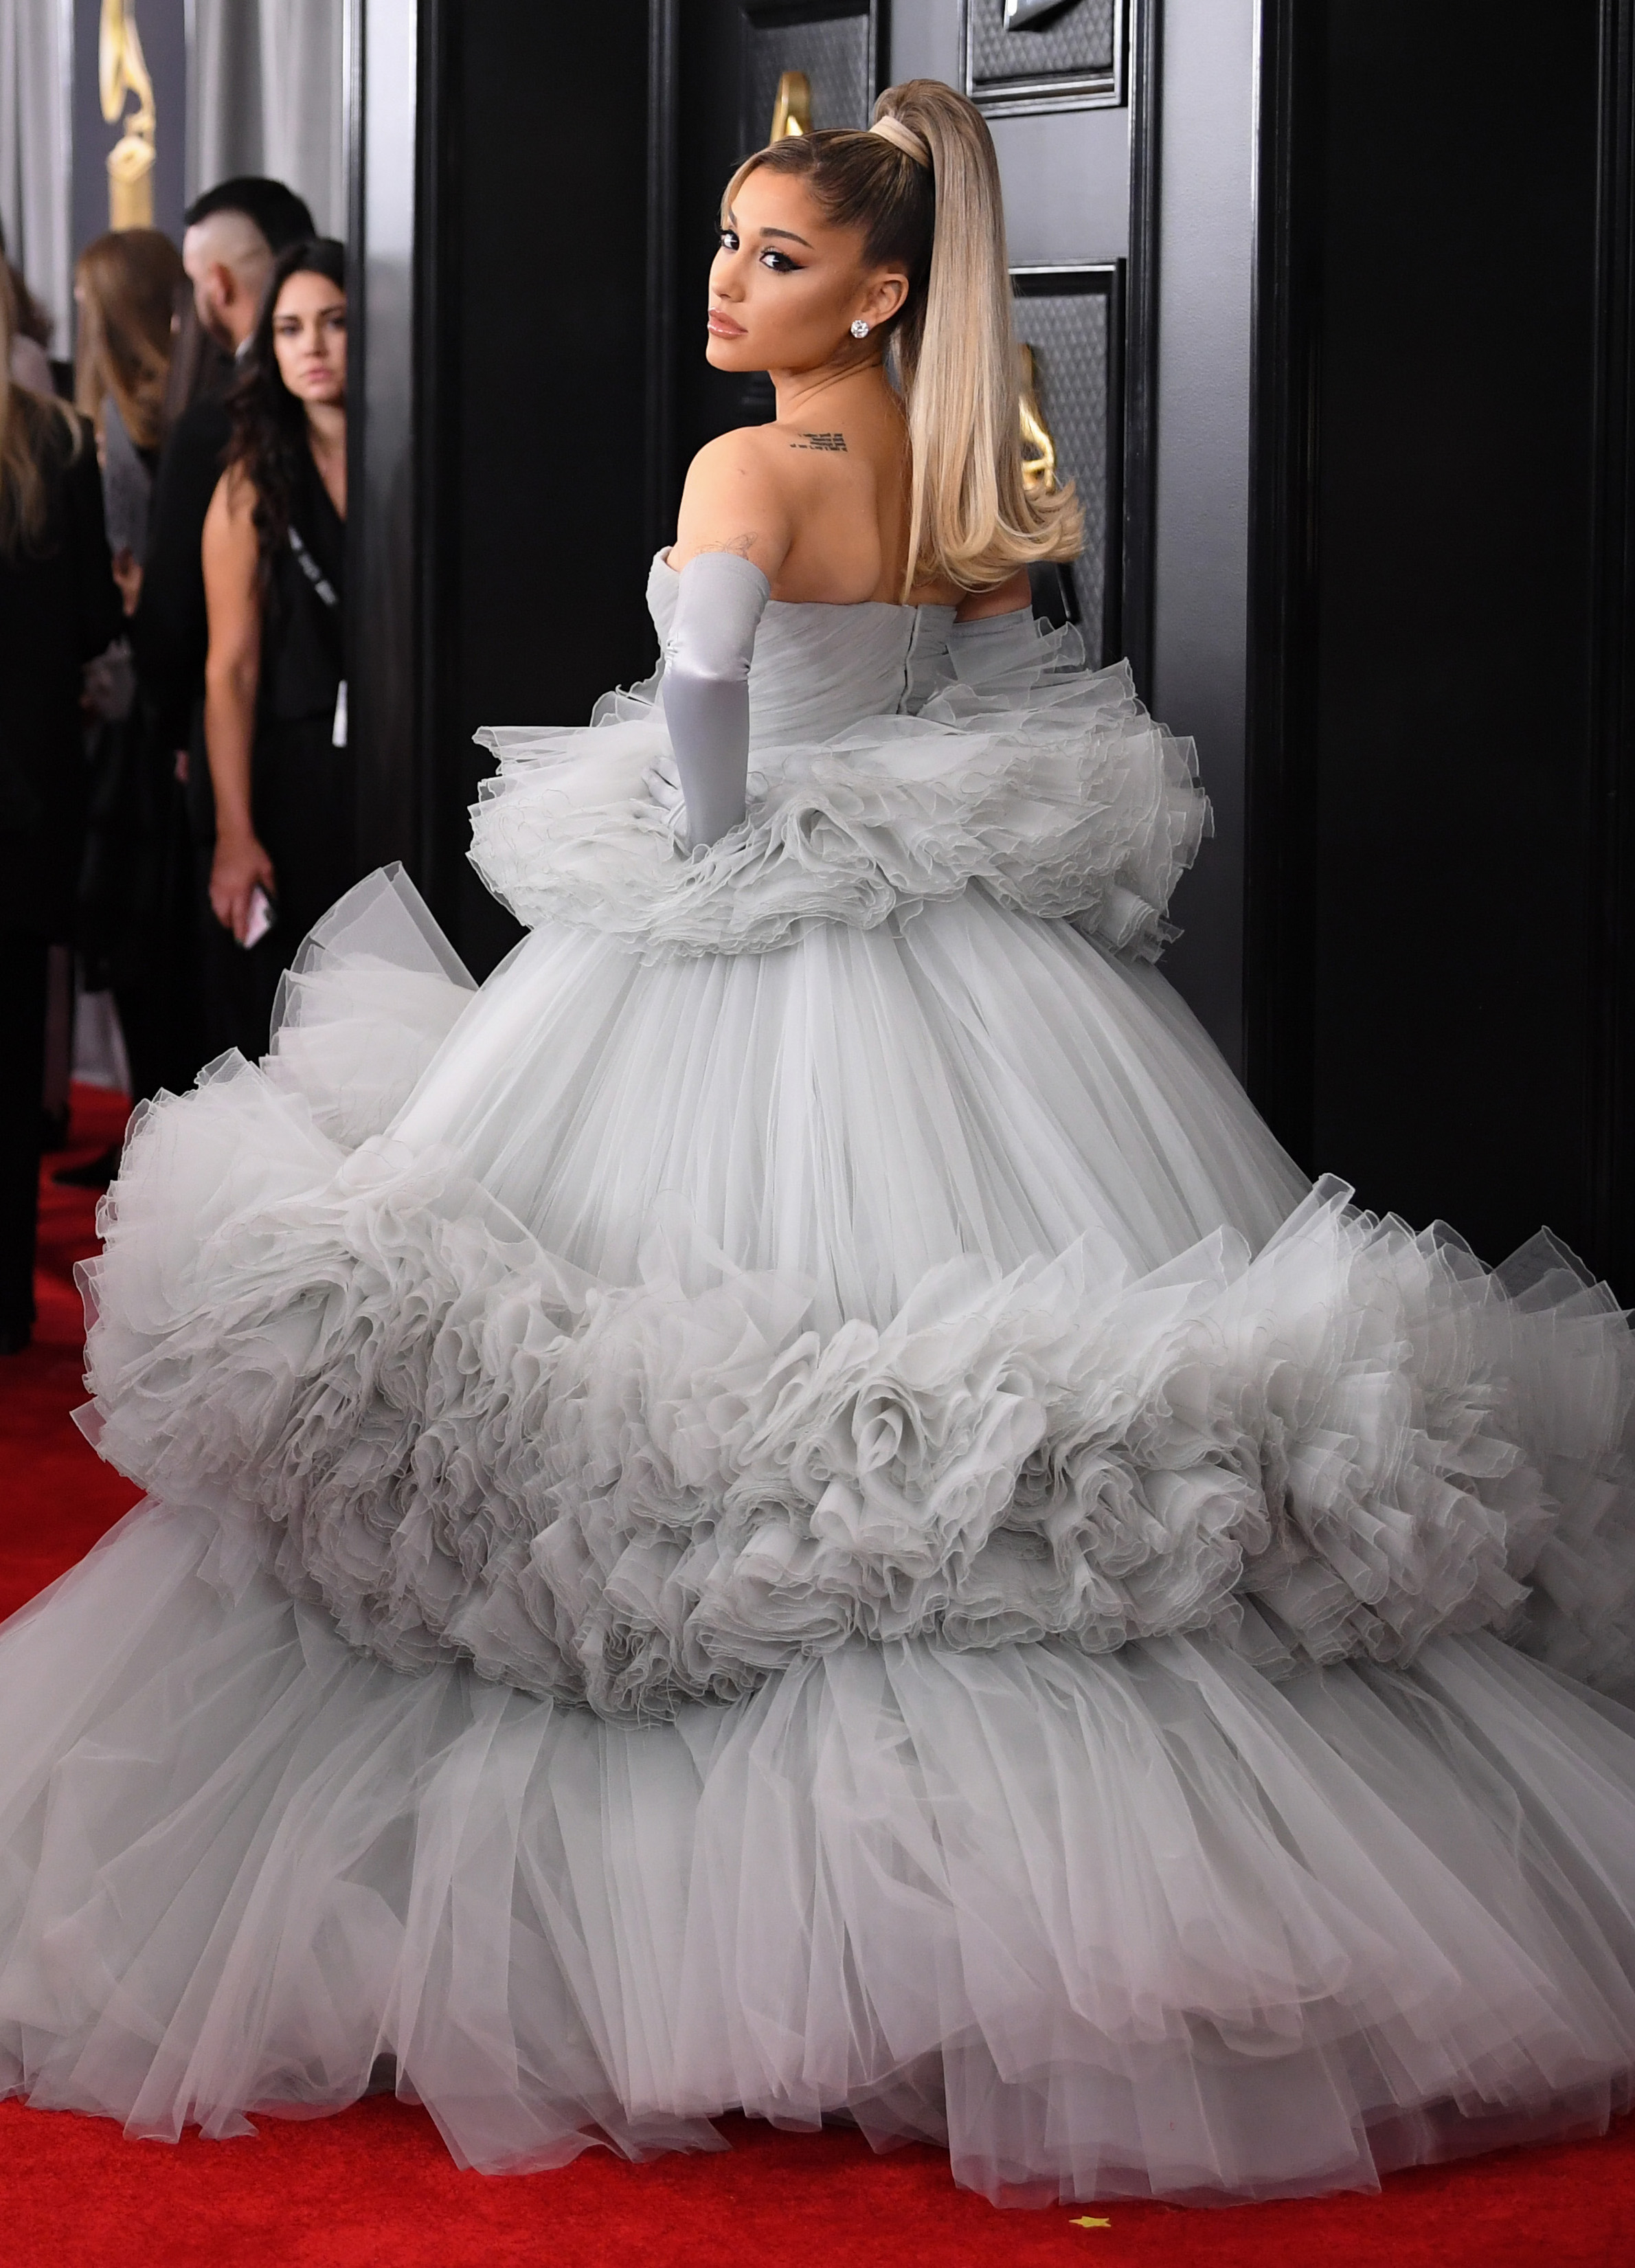 Grammys 2020 Fashion: See the Red Carpet Styles of Your Fave Stars